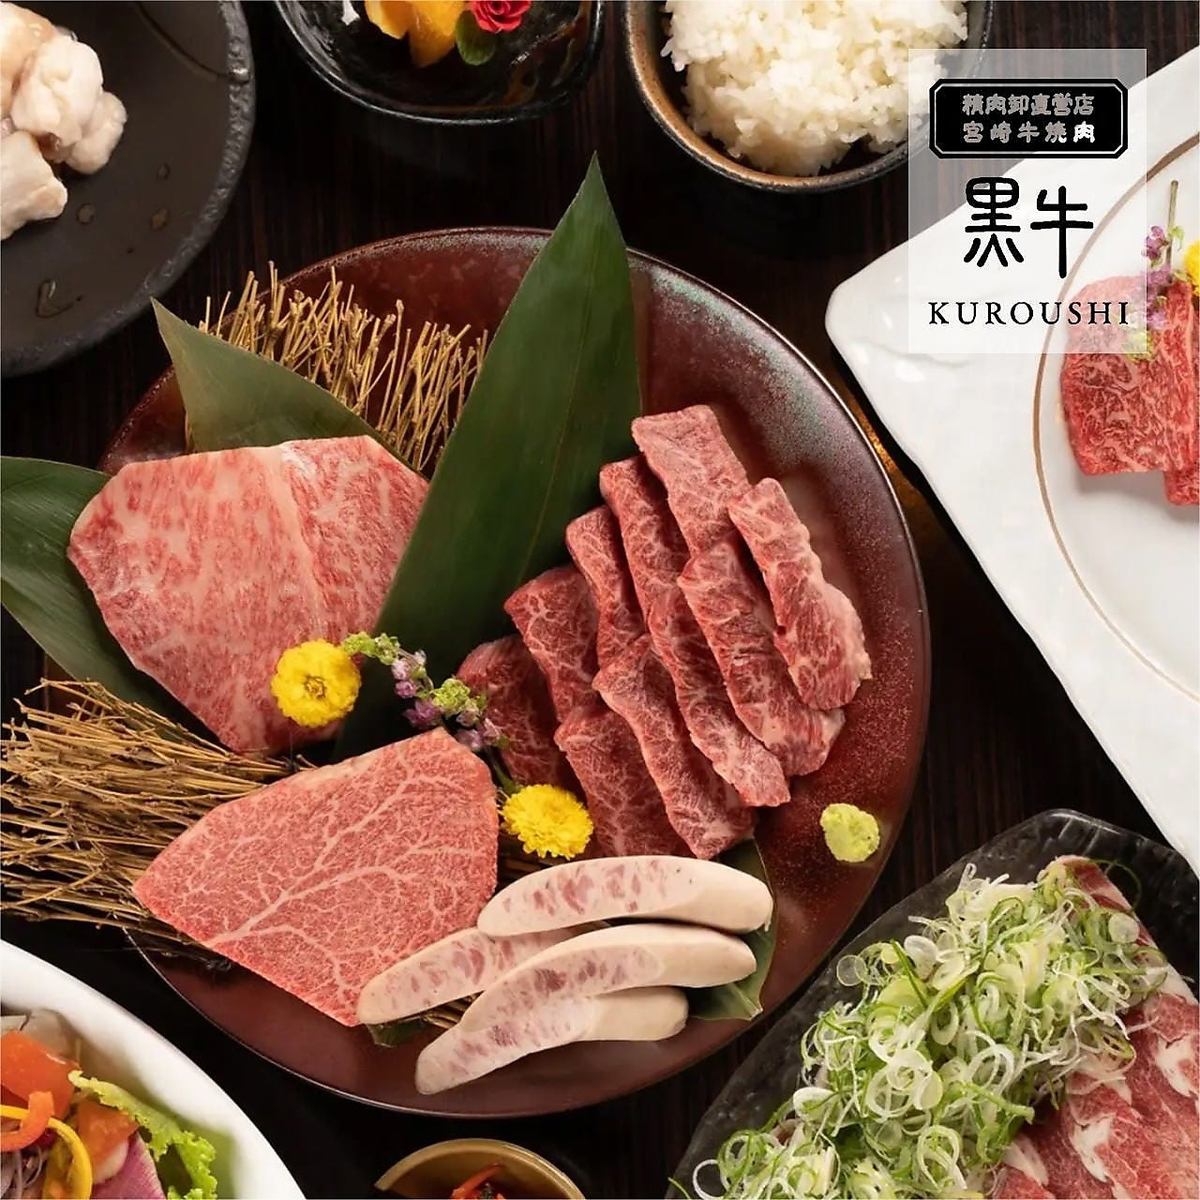 Meat wholesaler directly managed store Enjoy high quality Miyazaki beef! Recommended for parties, 2-hour all-you-can-drink course starts from 4,500 yen